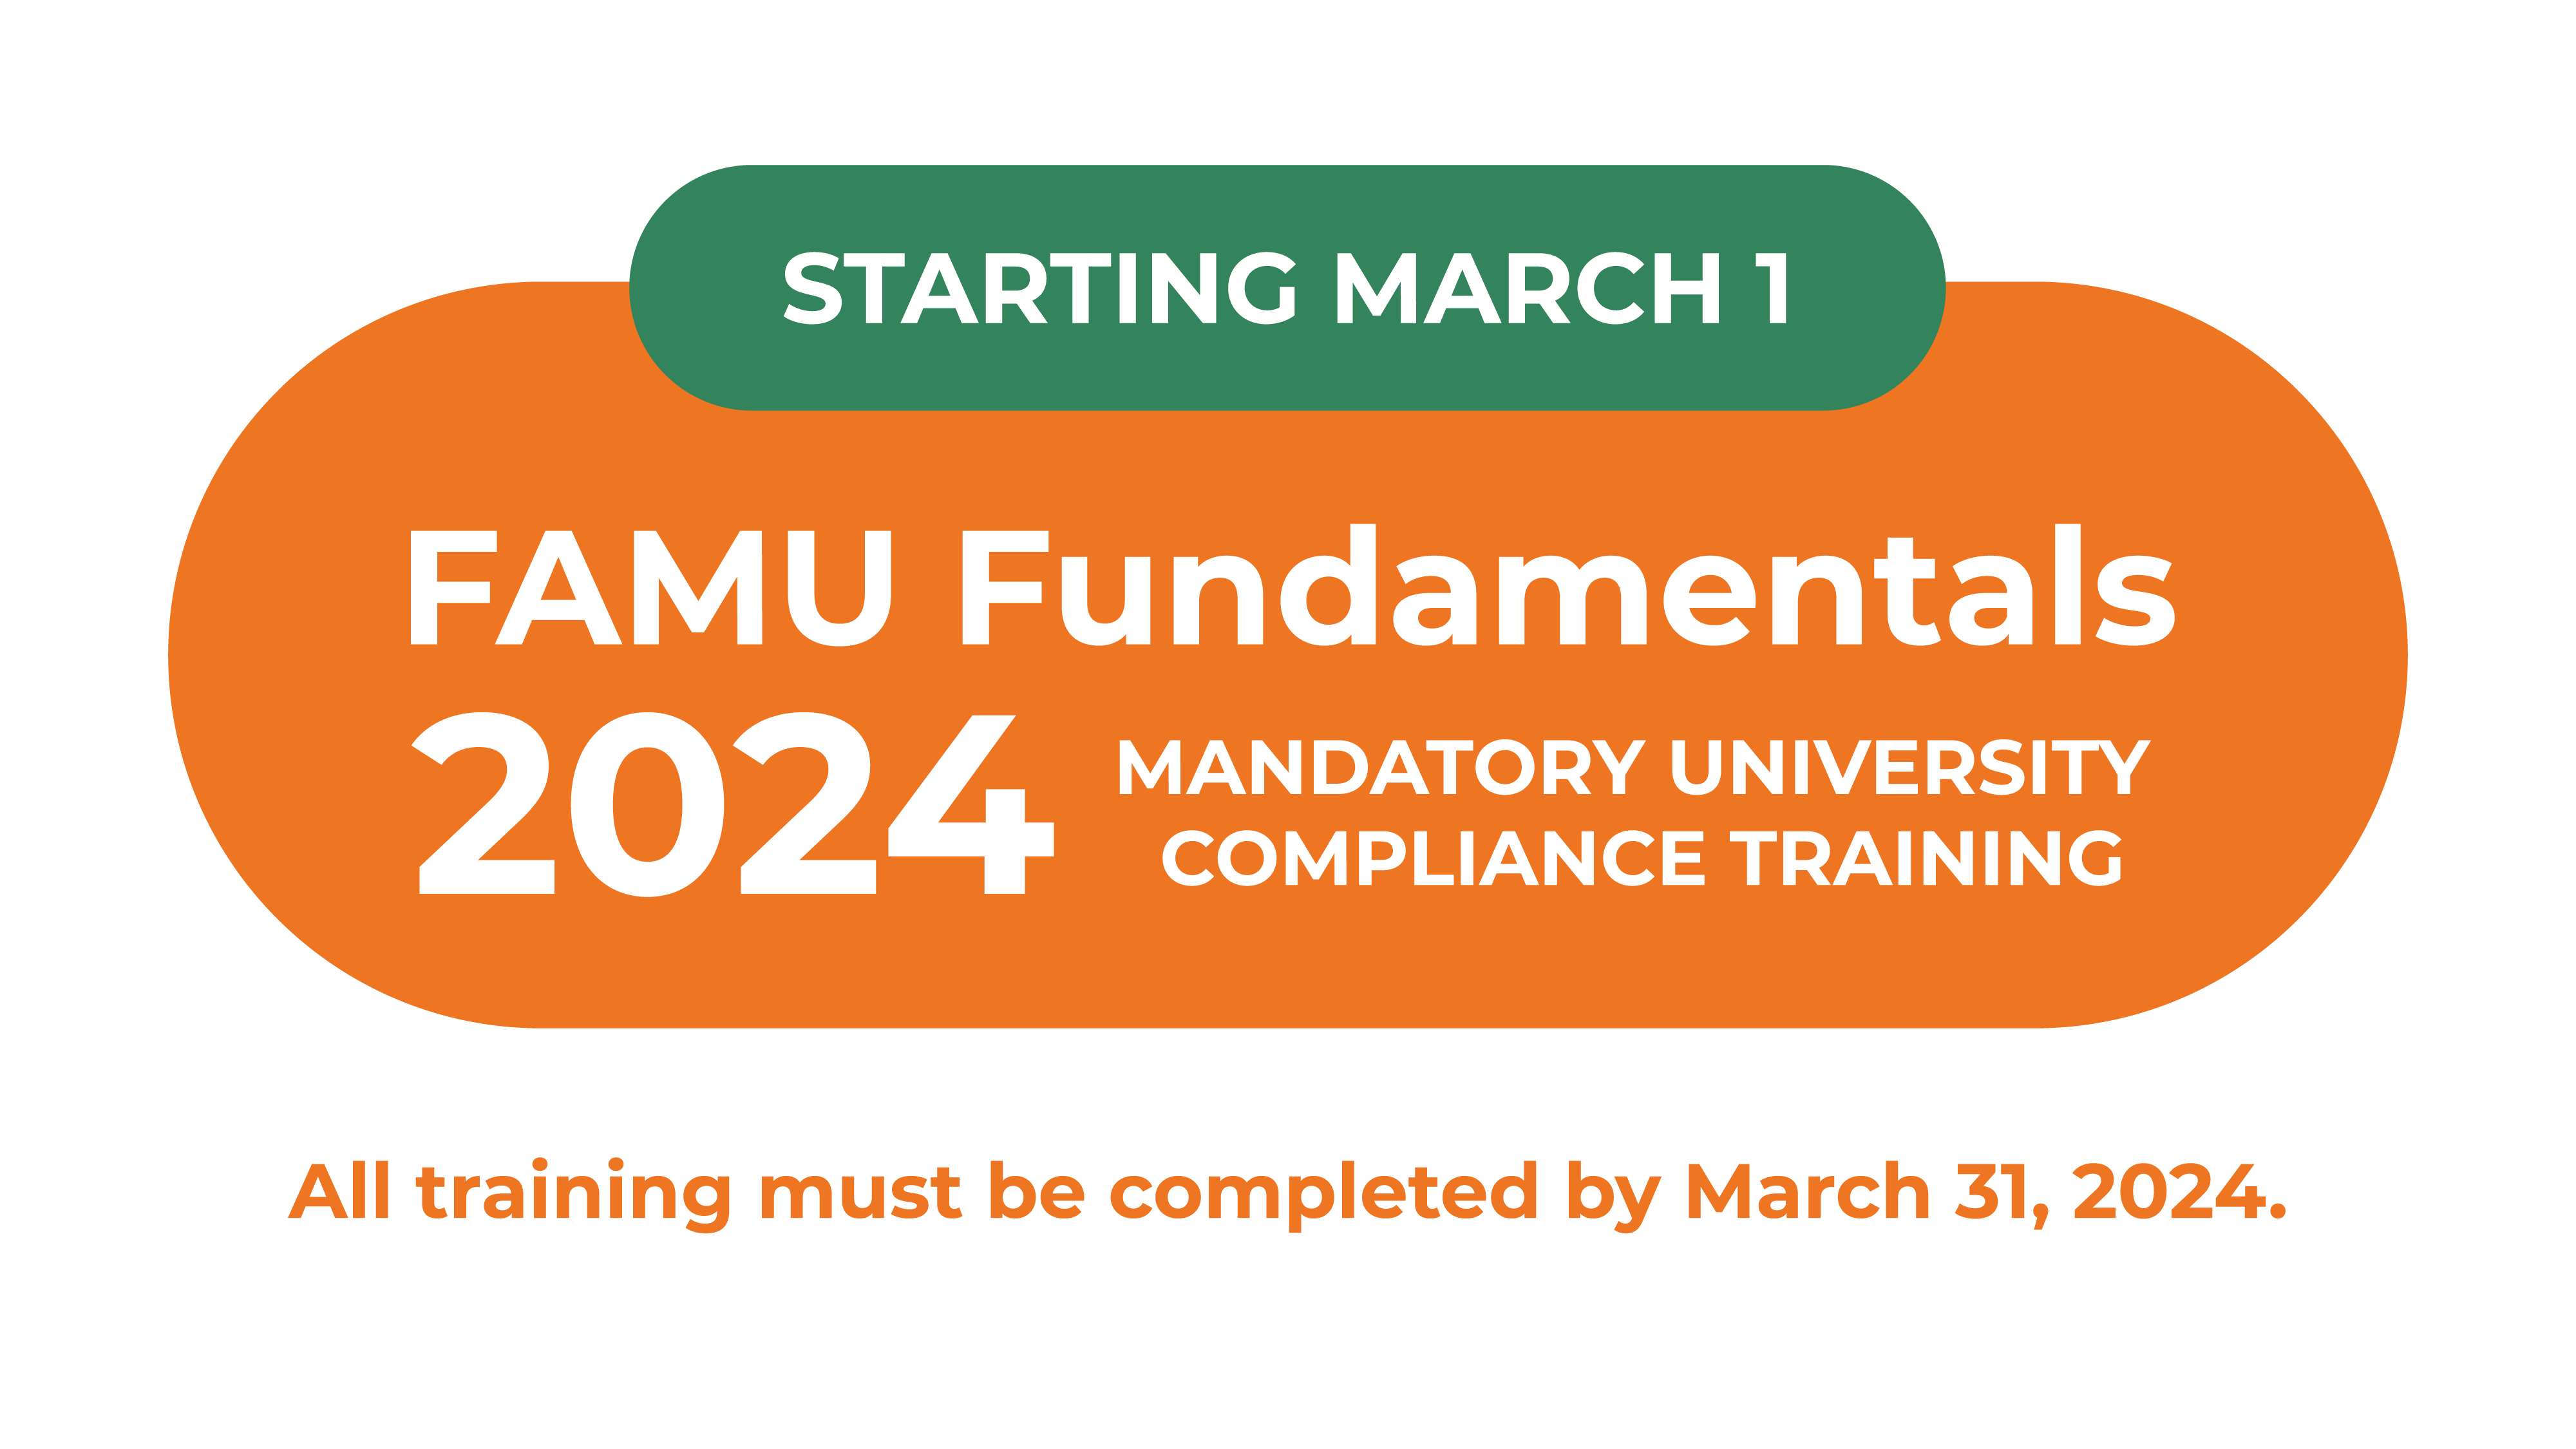 Starting March 1 – FAMU Fundamentals 2024 Mandatory University Compliance Training – All training must be completed by March 31.